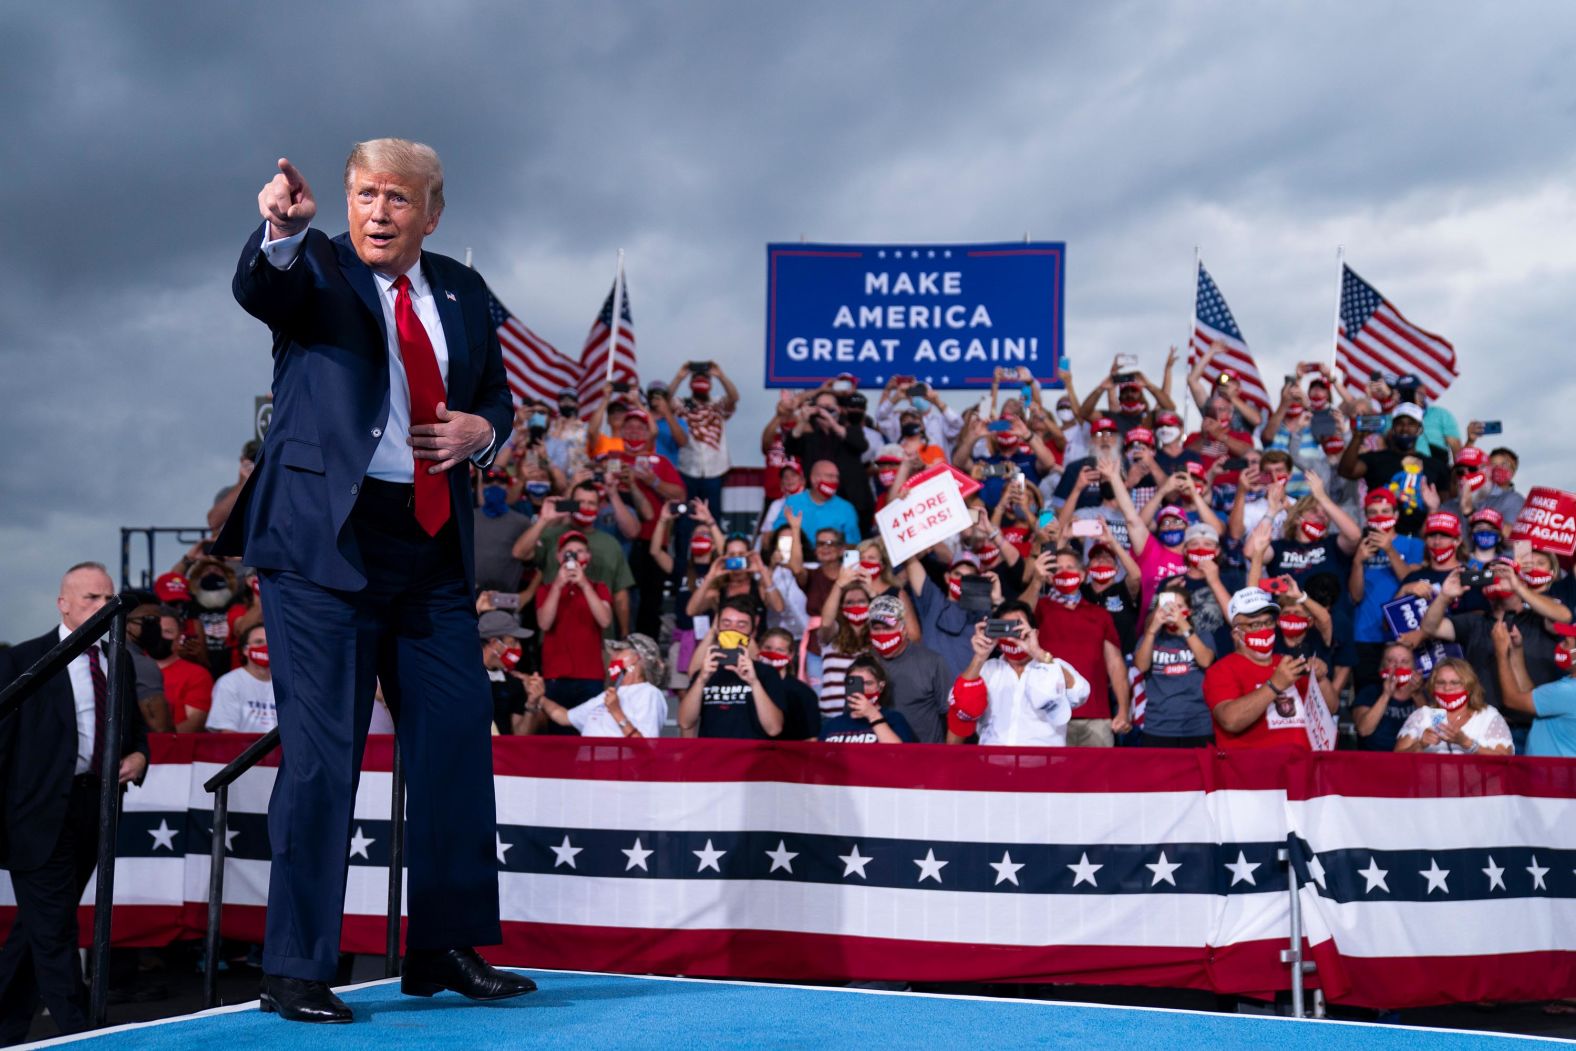 Trump arrives to speak at a <a href="index.php?page=&url=https%3A%2F%2Fwww.cnn.com%2F2020%2F09%2F08%2Fpolitics%2Fdonald-trump-north-carolina-2020-election%2Findex.html" target="_blank">campaign rally in Winston-Salem, North Carolina,</a> in September 2020.